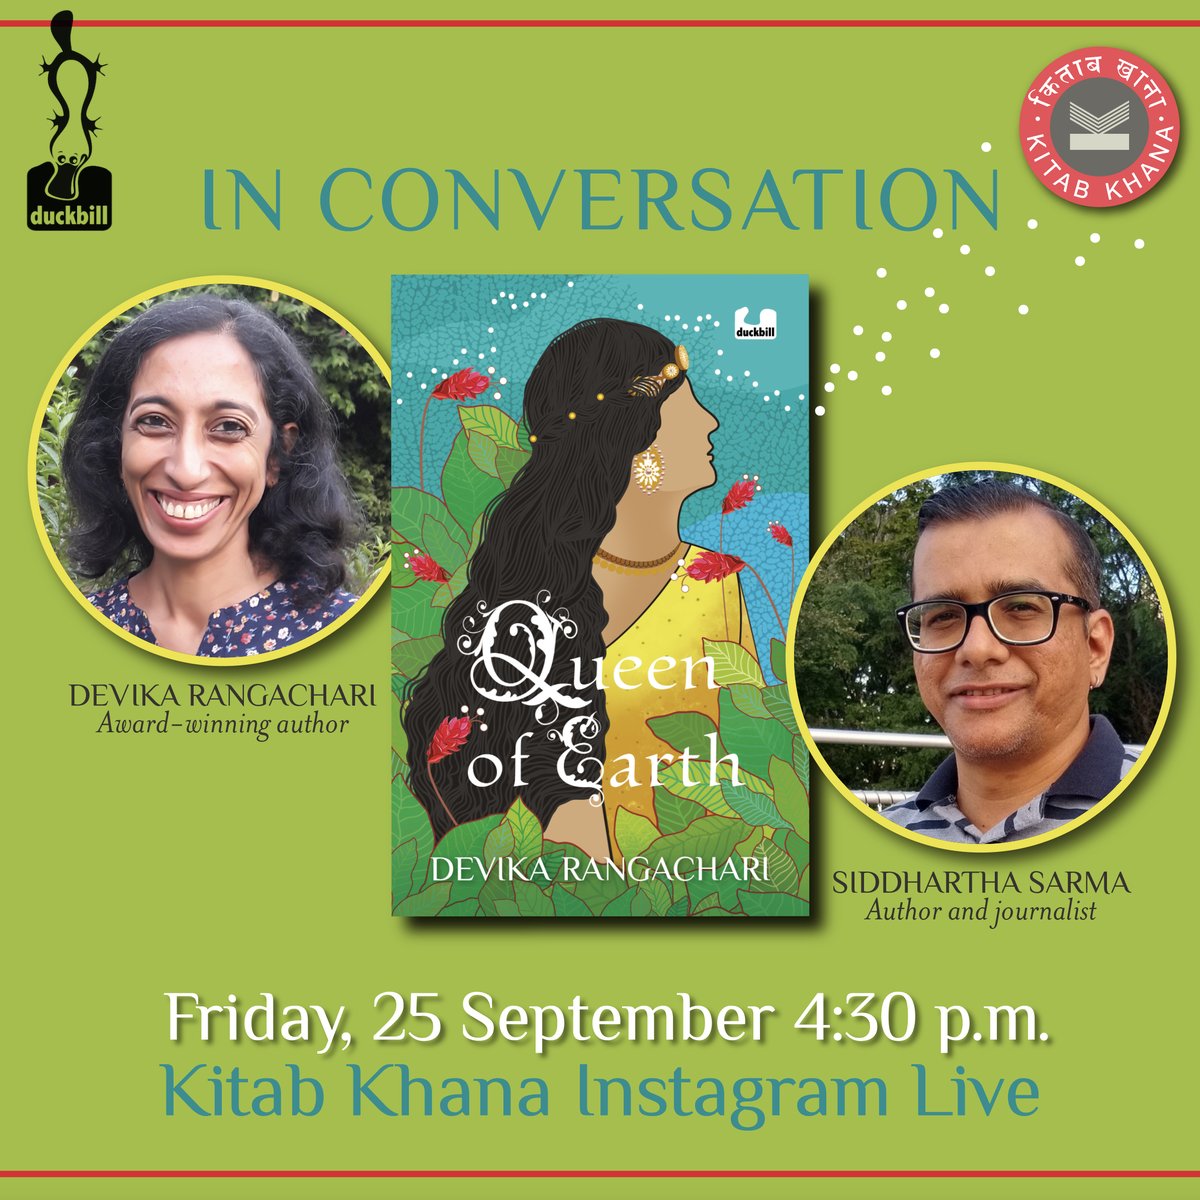 Join us this Friday, 25 September at 4:30 p.m. as #DevikaRangachari launches her latest children’s novel – ‘Queen of Earth’ on #InstaLive. In conversation with author & journalist #SiddharthaSarma, Devika would be sharing the riveting tale of #Prithvimahadevi.

#booklaunch